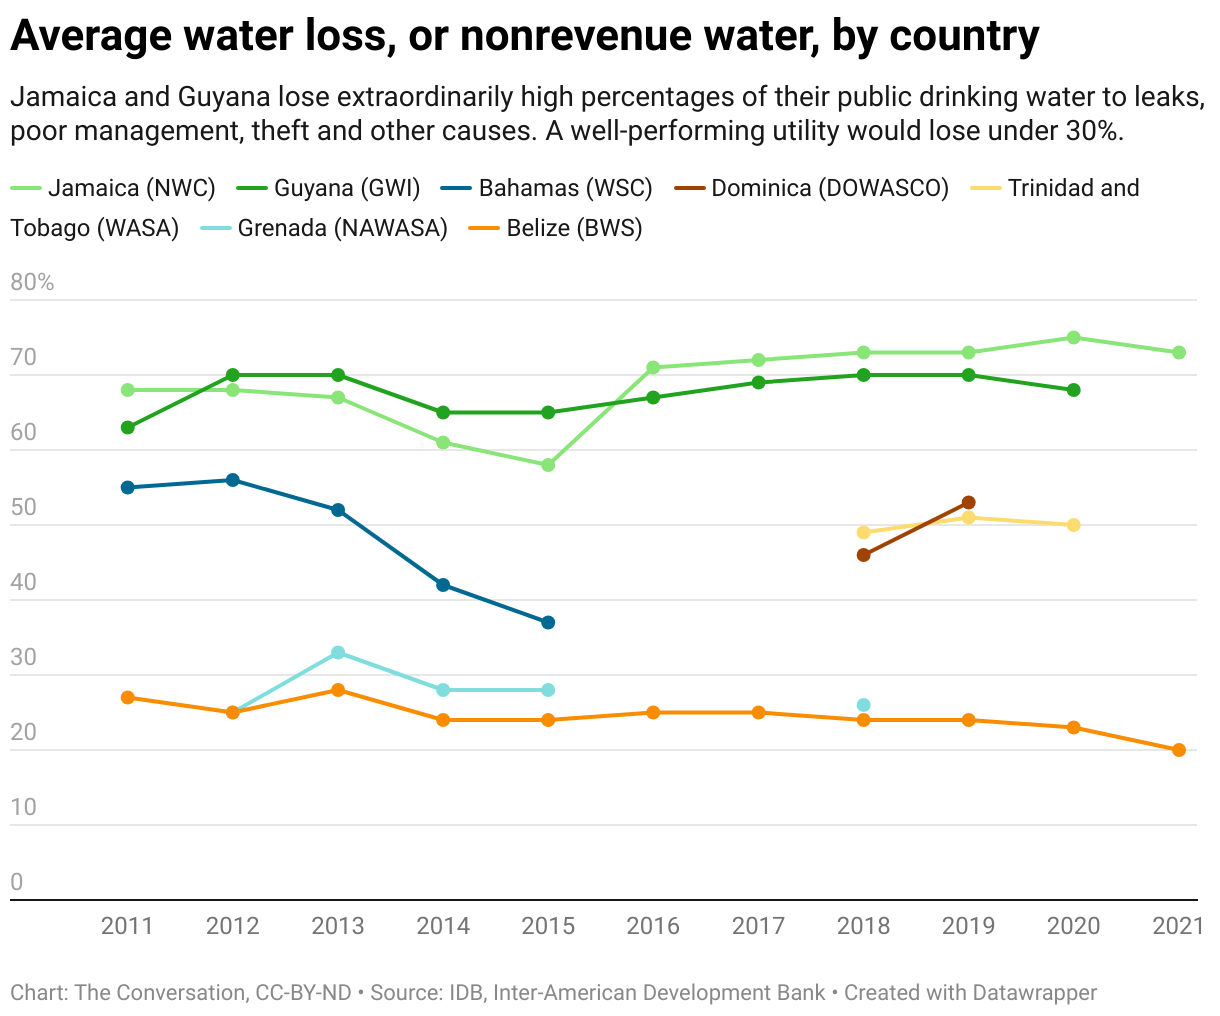 Chart showing average water loss, or nonrevenue water, by country.